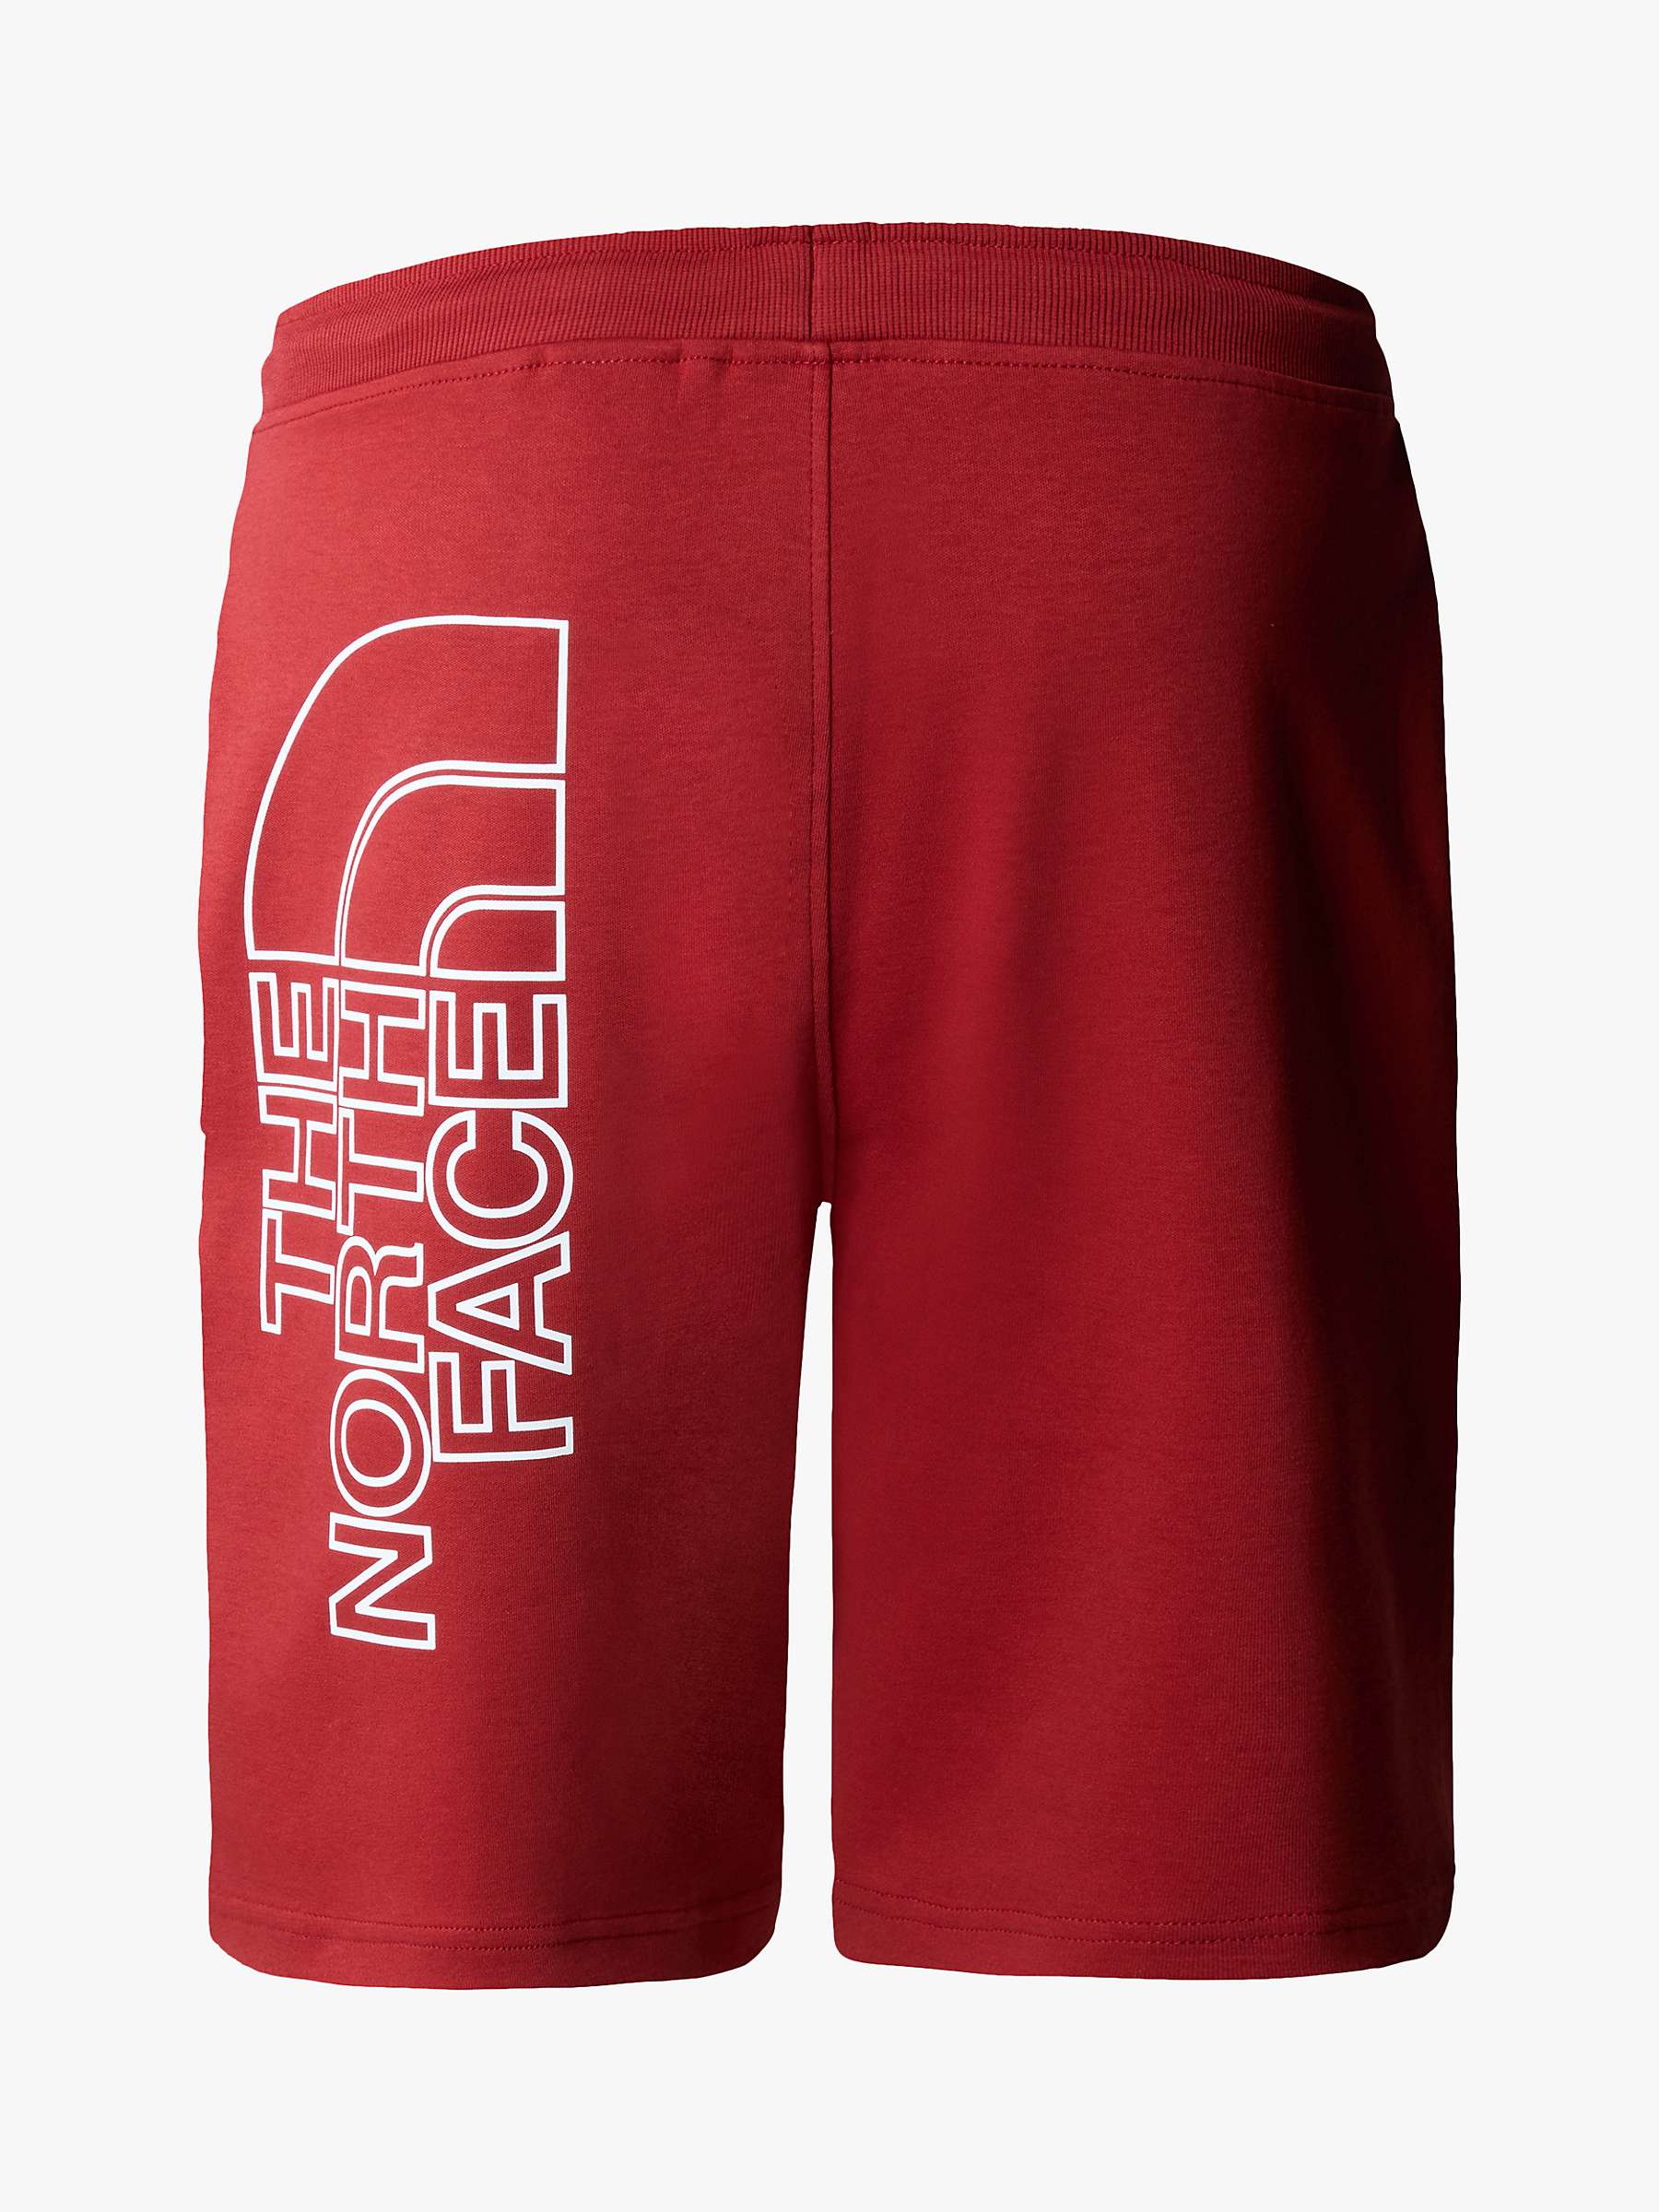 Buy The North Face Graphic Short, Red Online at johnlewis.com